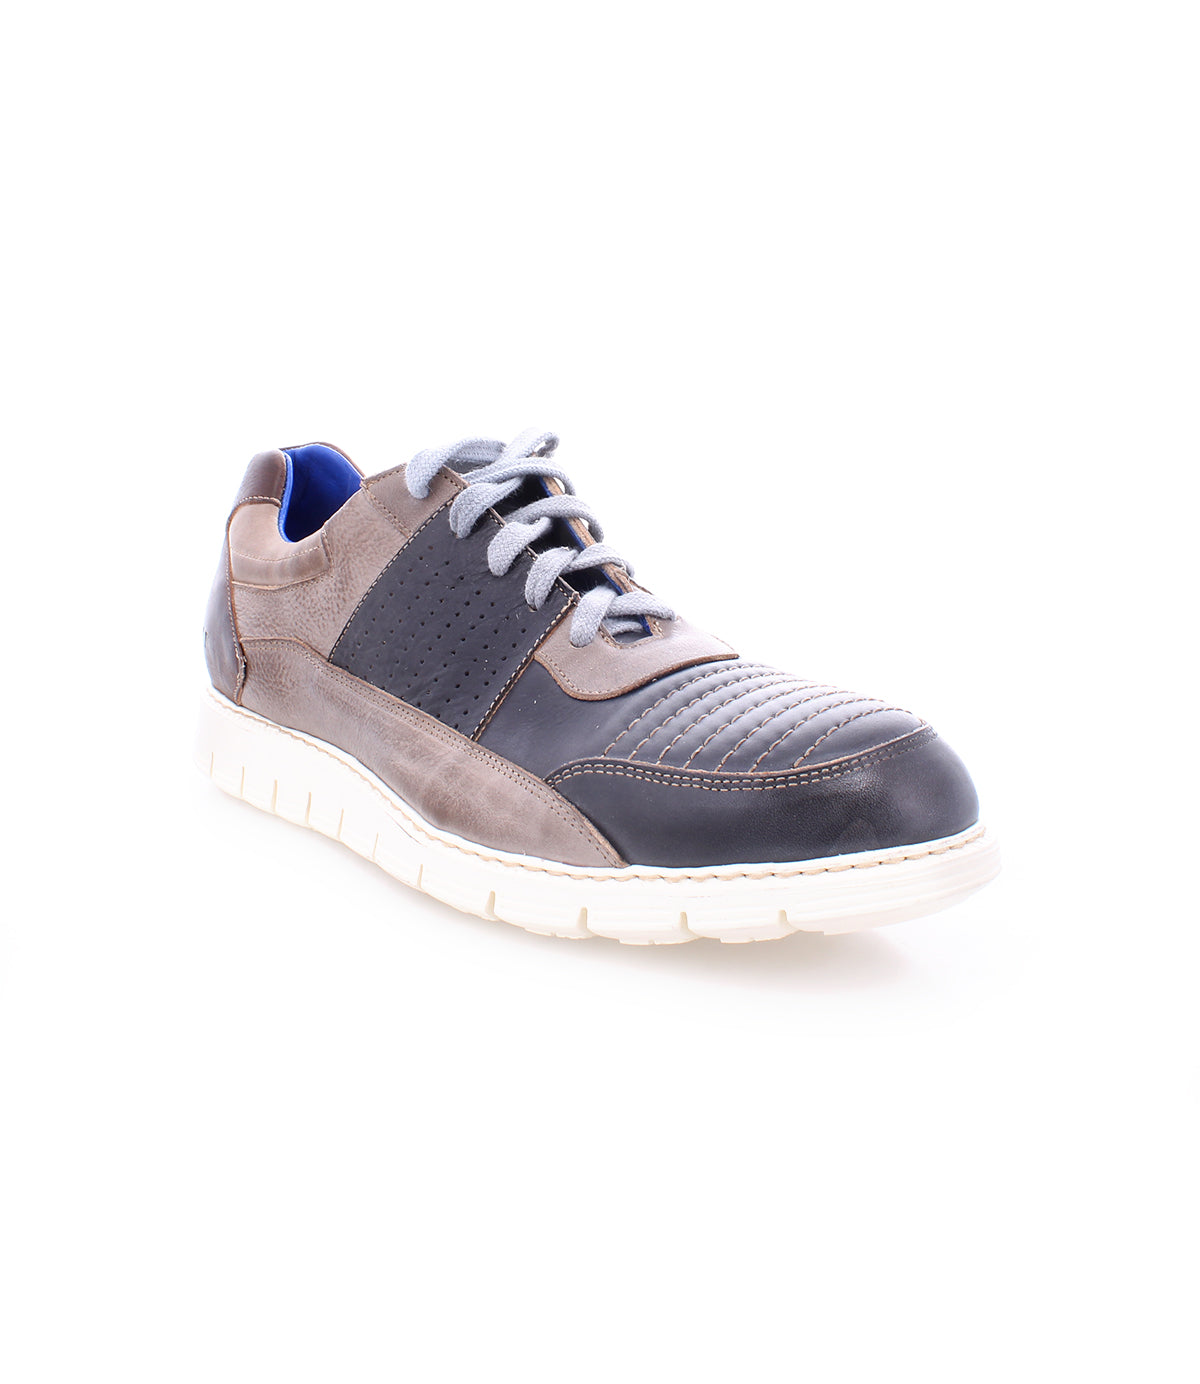 A men's grey and blue Fairman sneaker by Bed Stu on a white background.